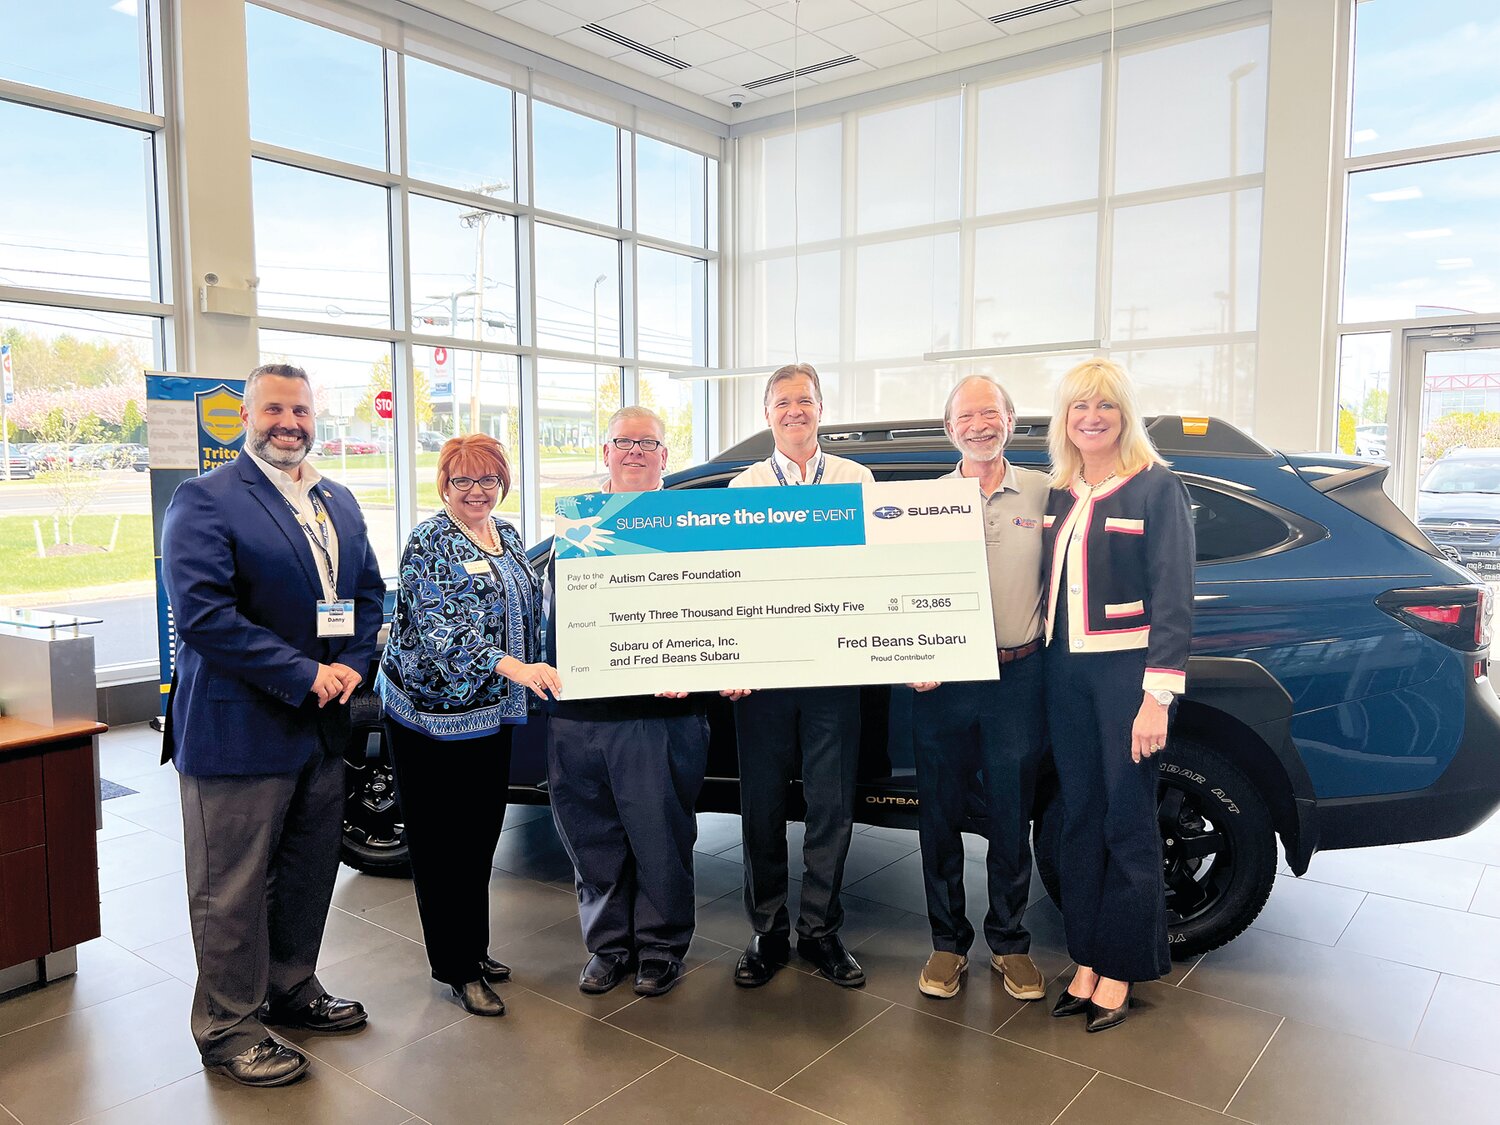 Fred Beans Subaru of Doylestown recently presented a donation to the Autism Cares Foundation based in Southampton following another successful year participating in the Subaru Share the Love Event. Among those presenting the check are Fred Beans Subaru General Manager Daniel Pavone, far left; General Sales Manager Todd Mock, center, holding check; and Fred Beans Automotive Group Vice President Beth Beans Gilbert, far right.